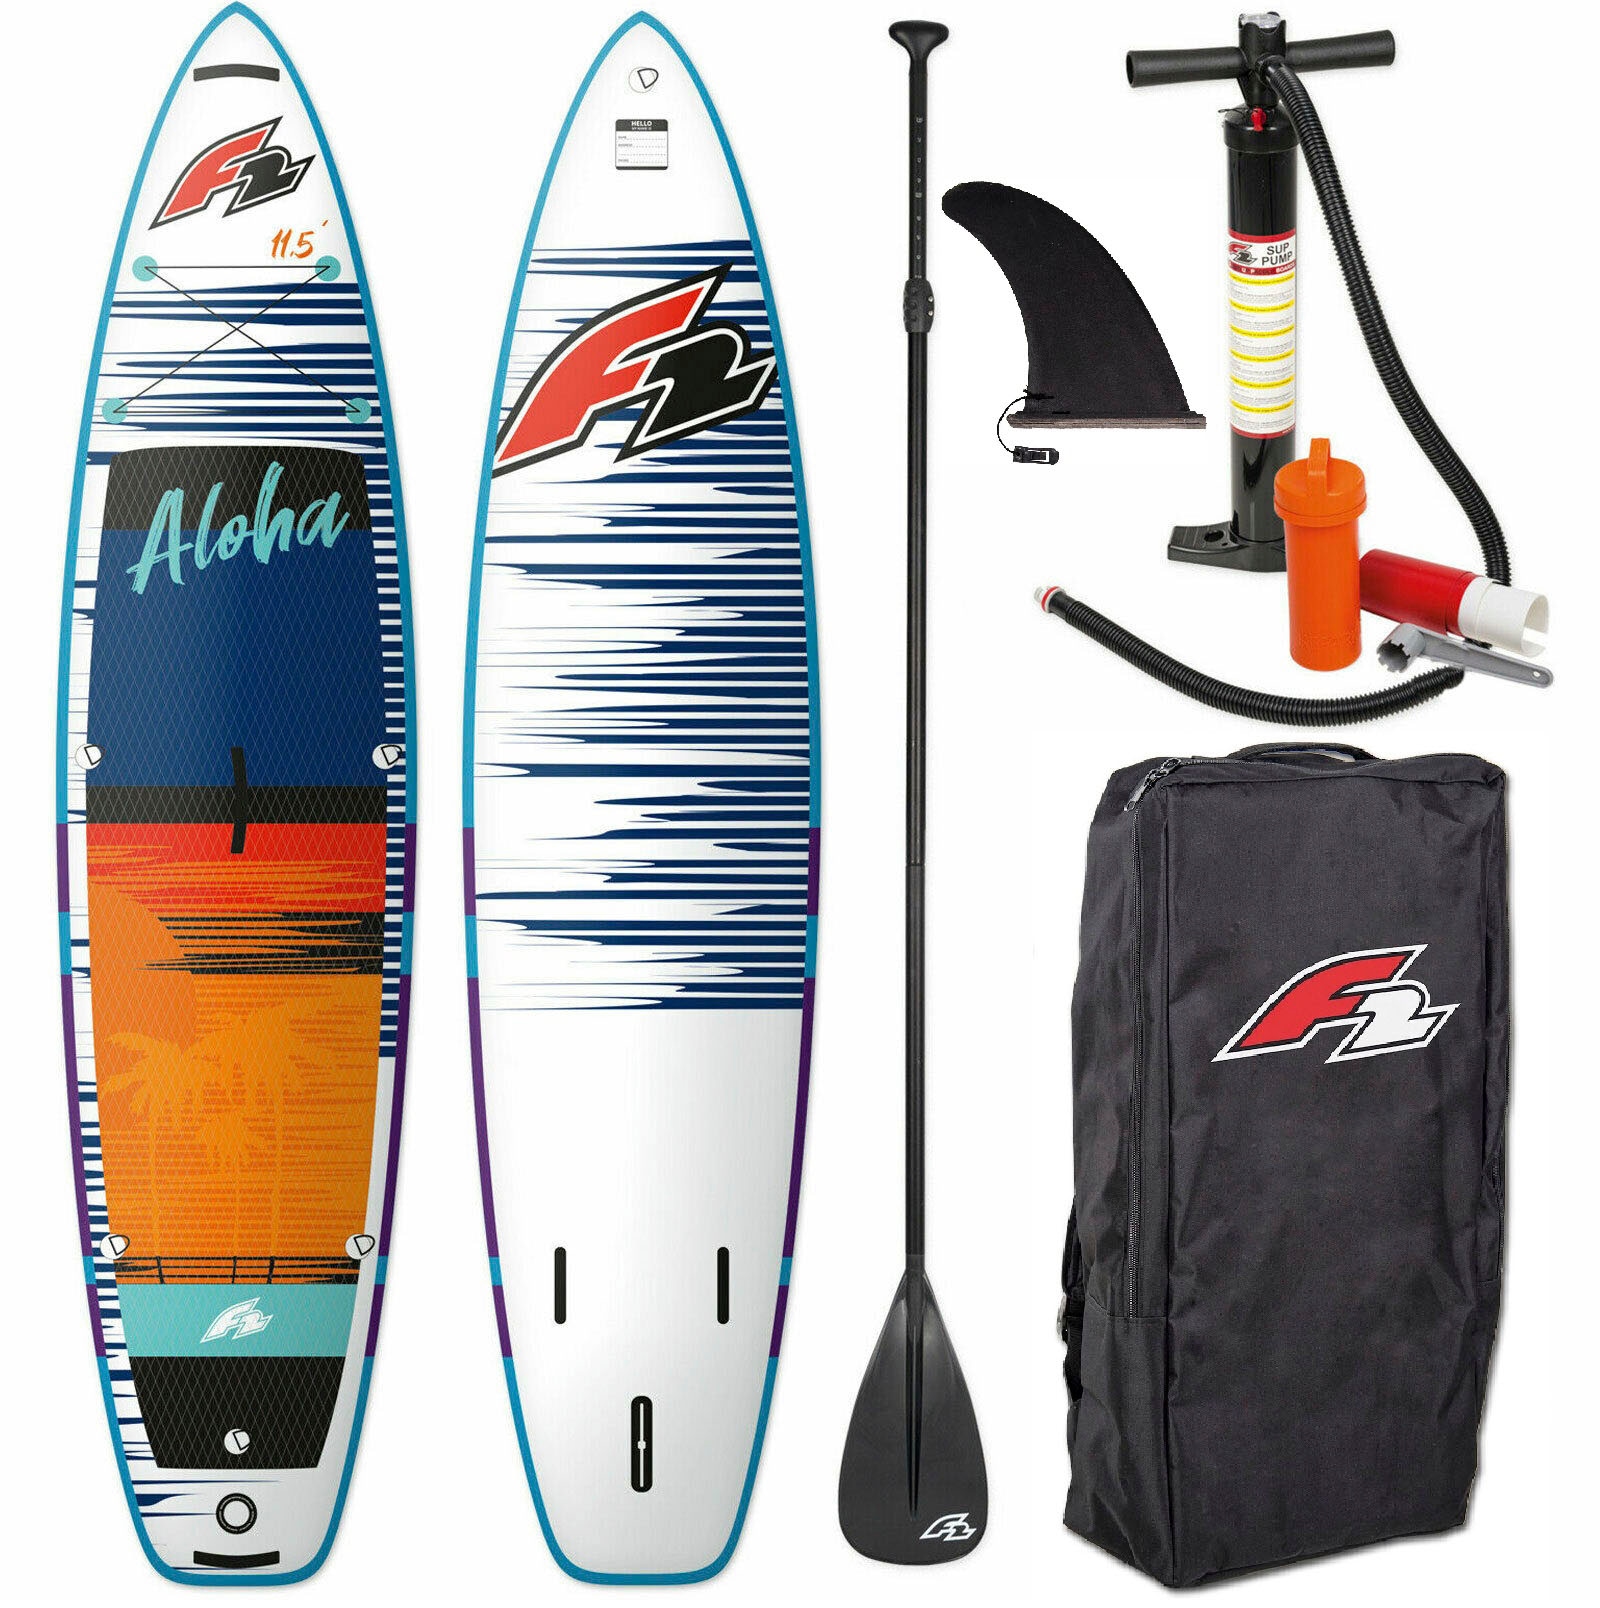 OTTO (Packung, red«, F2 5 im Shop kaufen Online SUP-Board tlg.) 11,4 »Aloha Inflatable